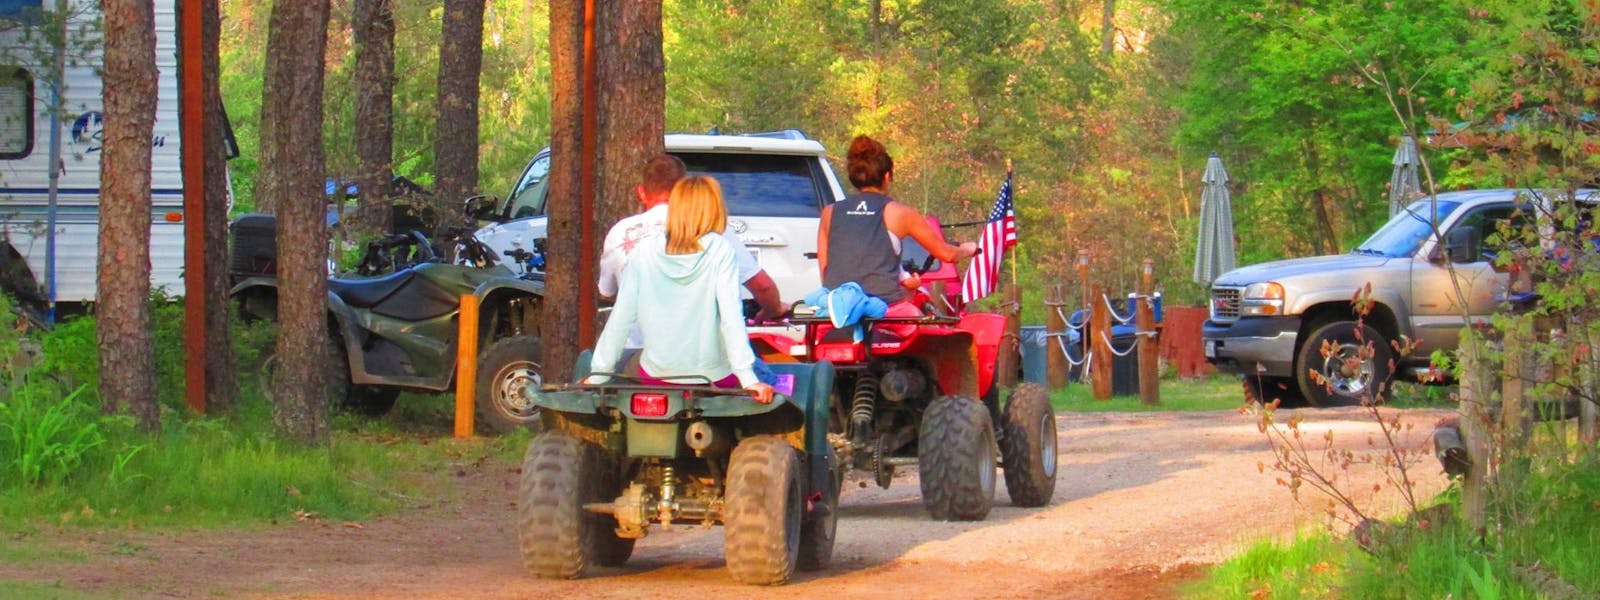 Direct ATV trail access at Best Bear Lodge & Campground